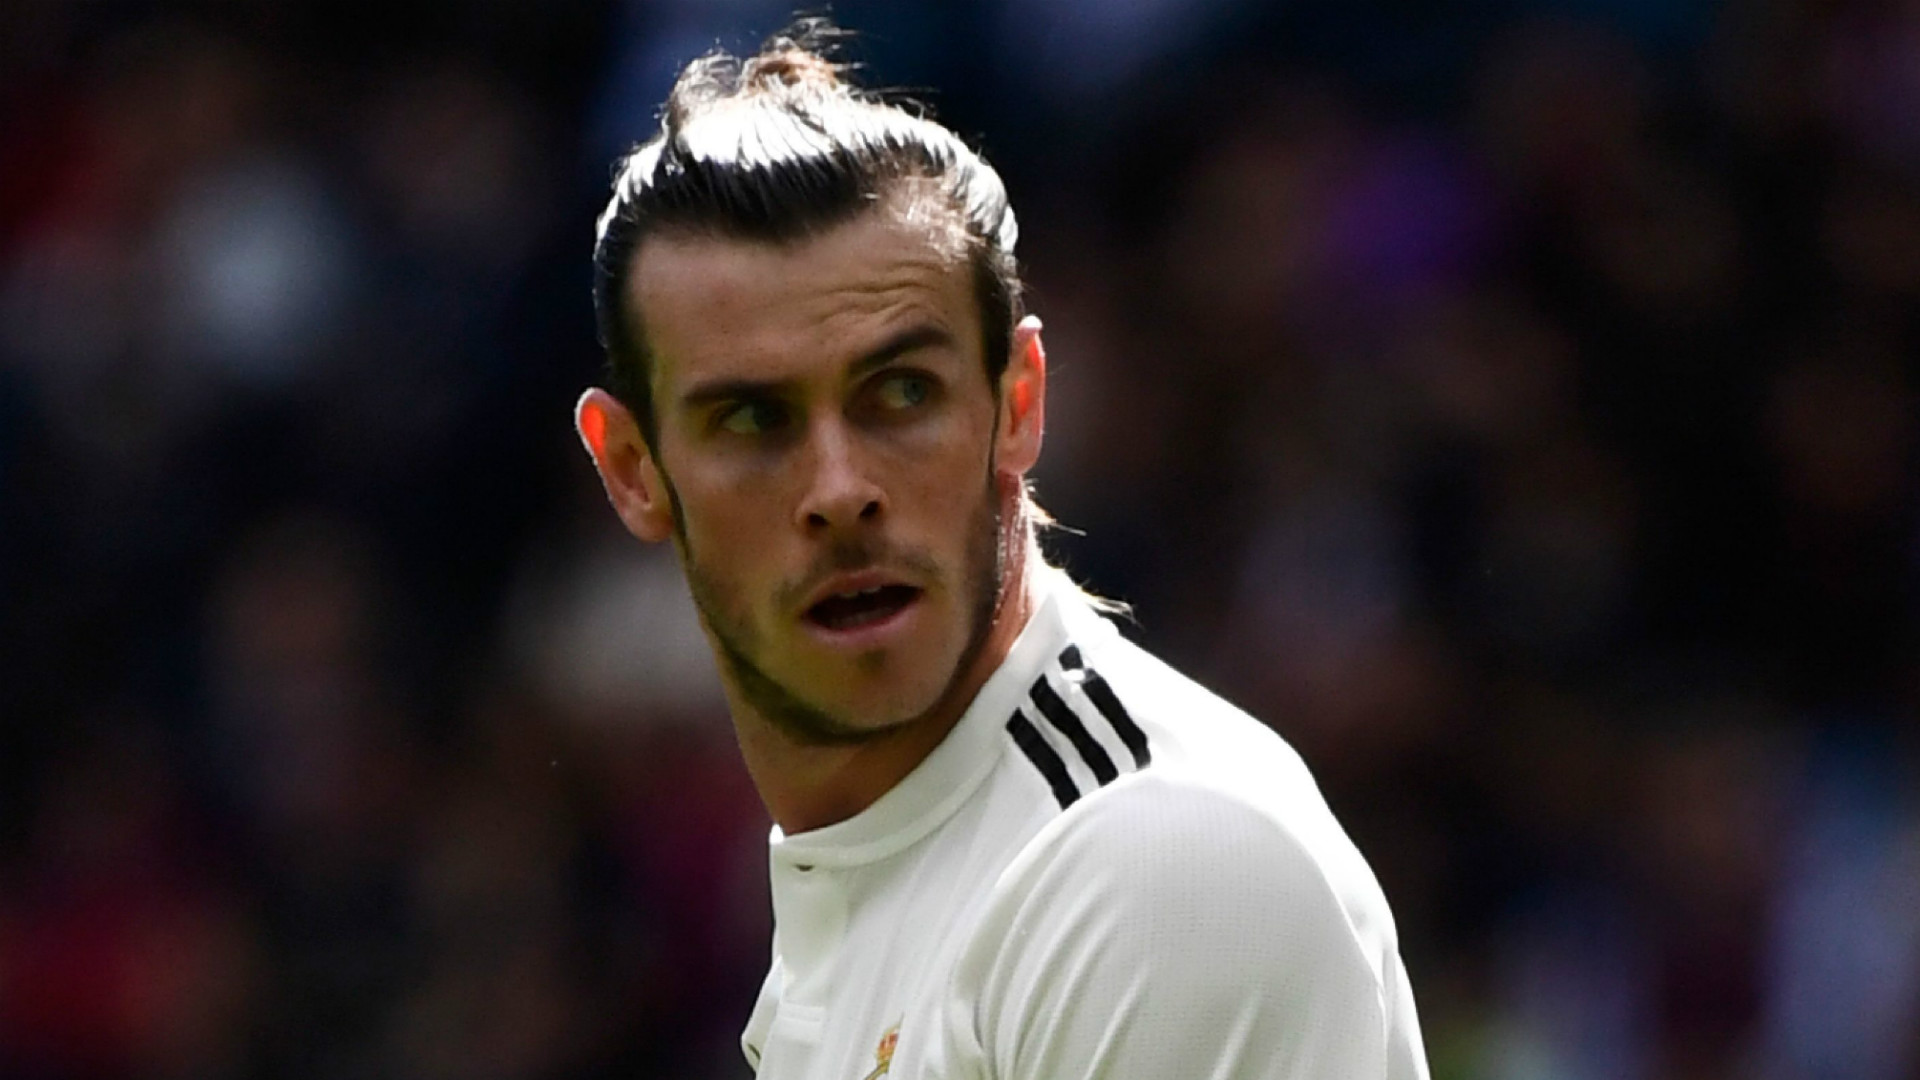 Transfer news and rumours LIVE: Real Madrid set €130m price tag on Bale | Goal.com